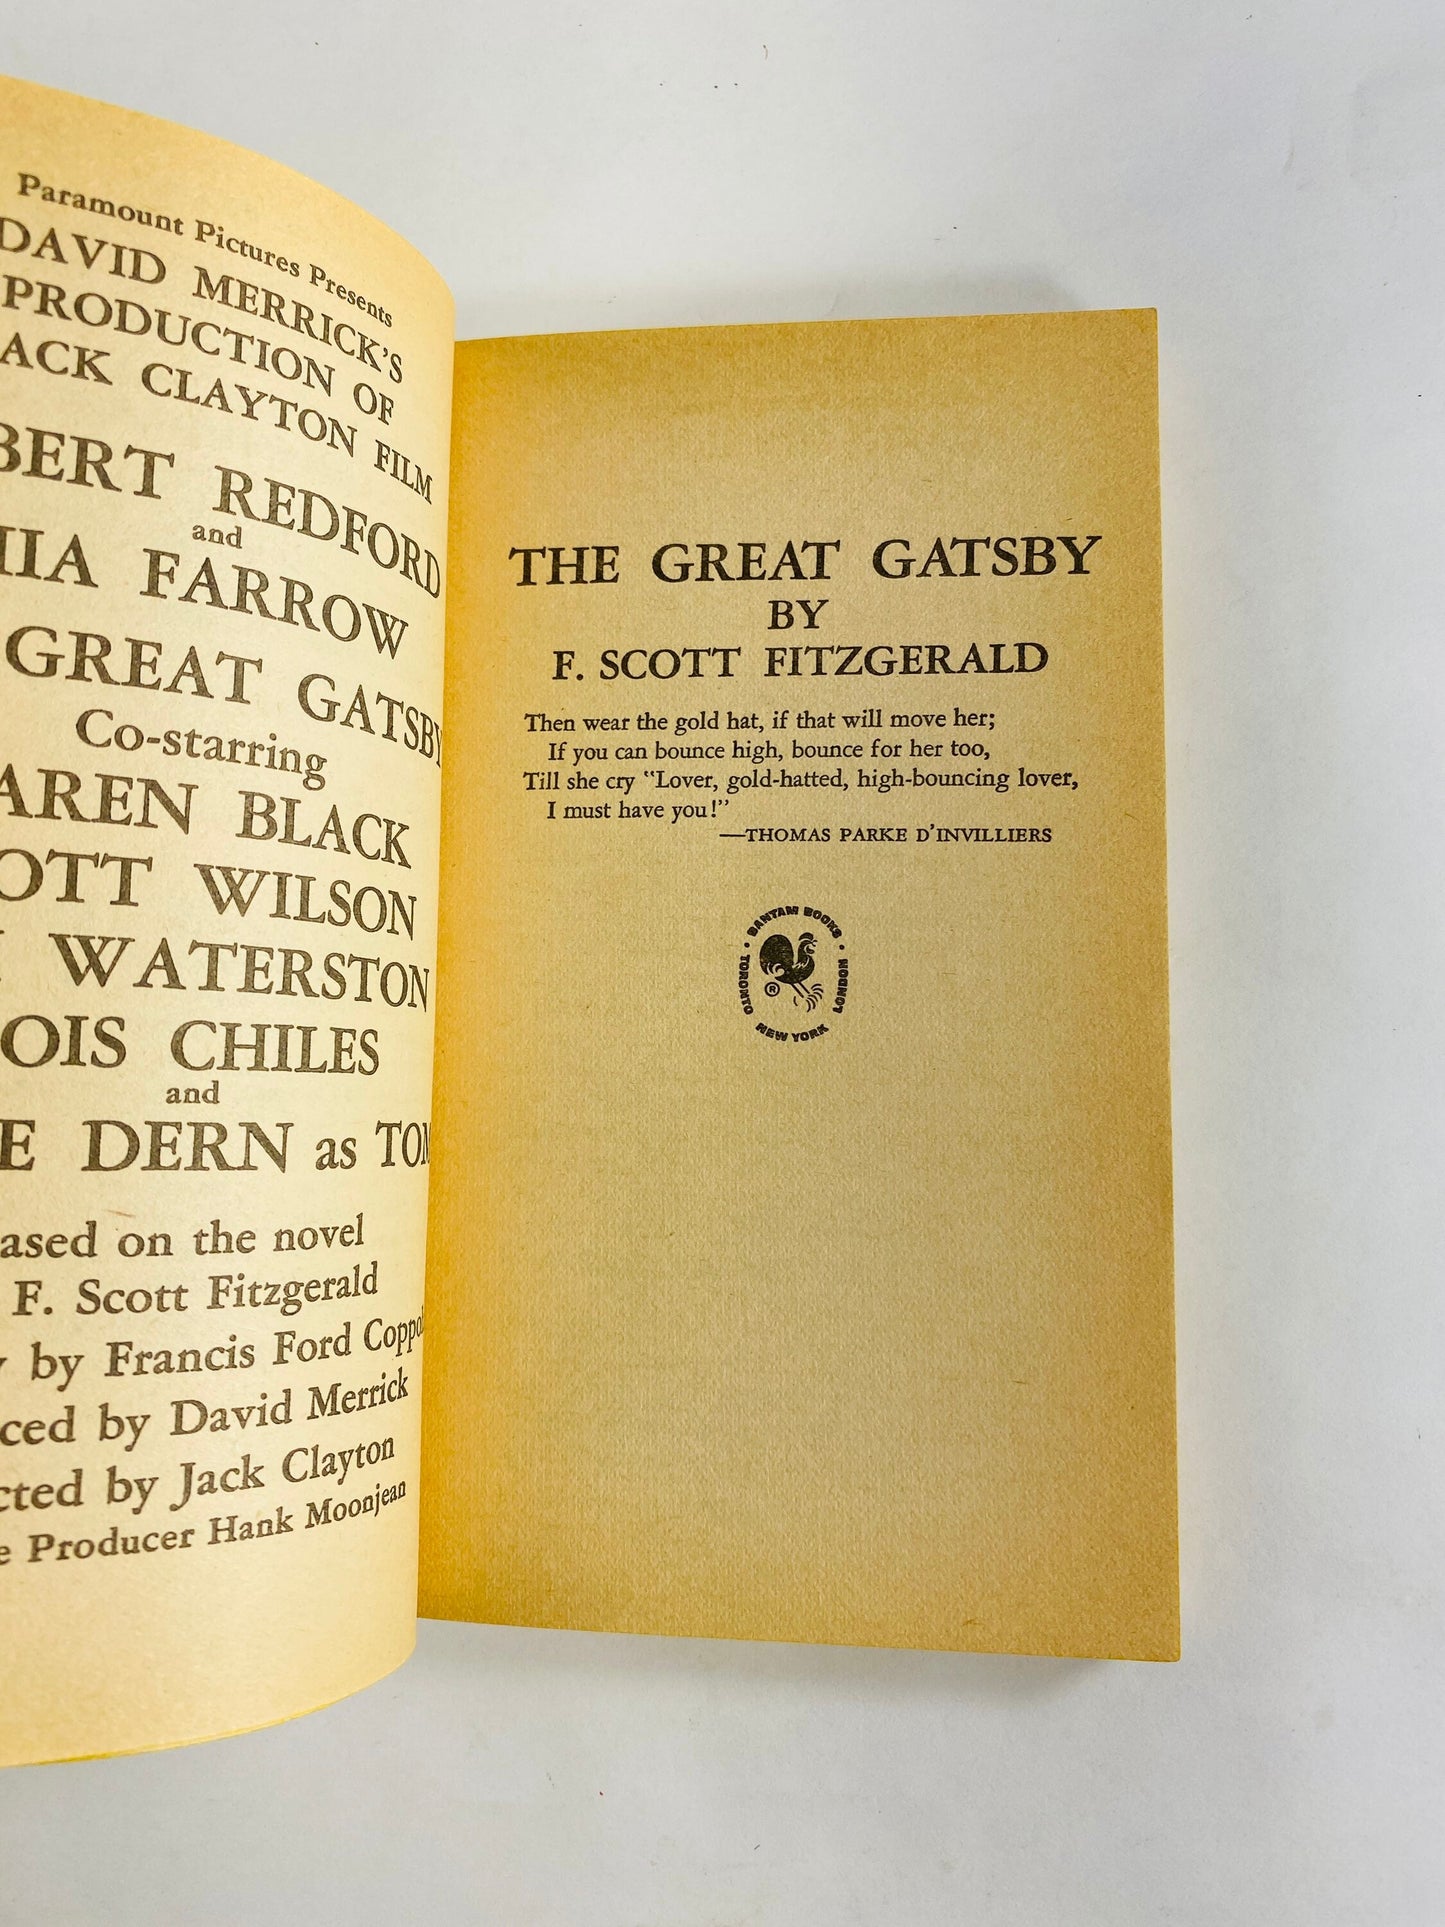 Great Gatsby by F Scott Fitzgerald Vintage paperback book circa 1974 Bantam edition with Paramount Pictures movie cover